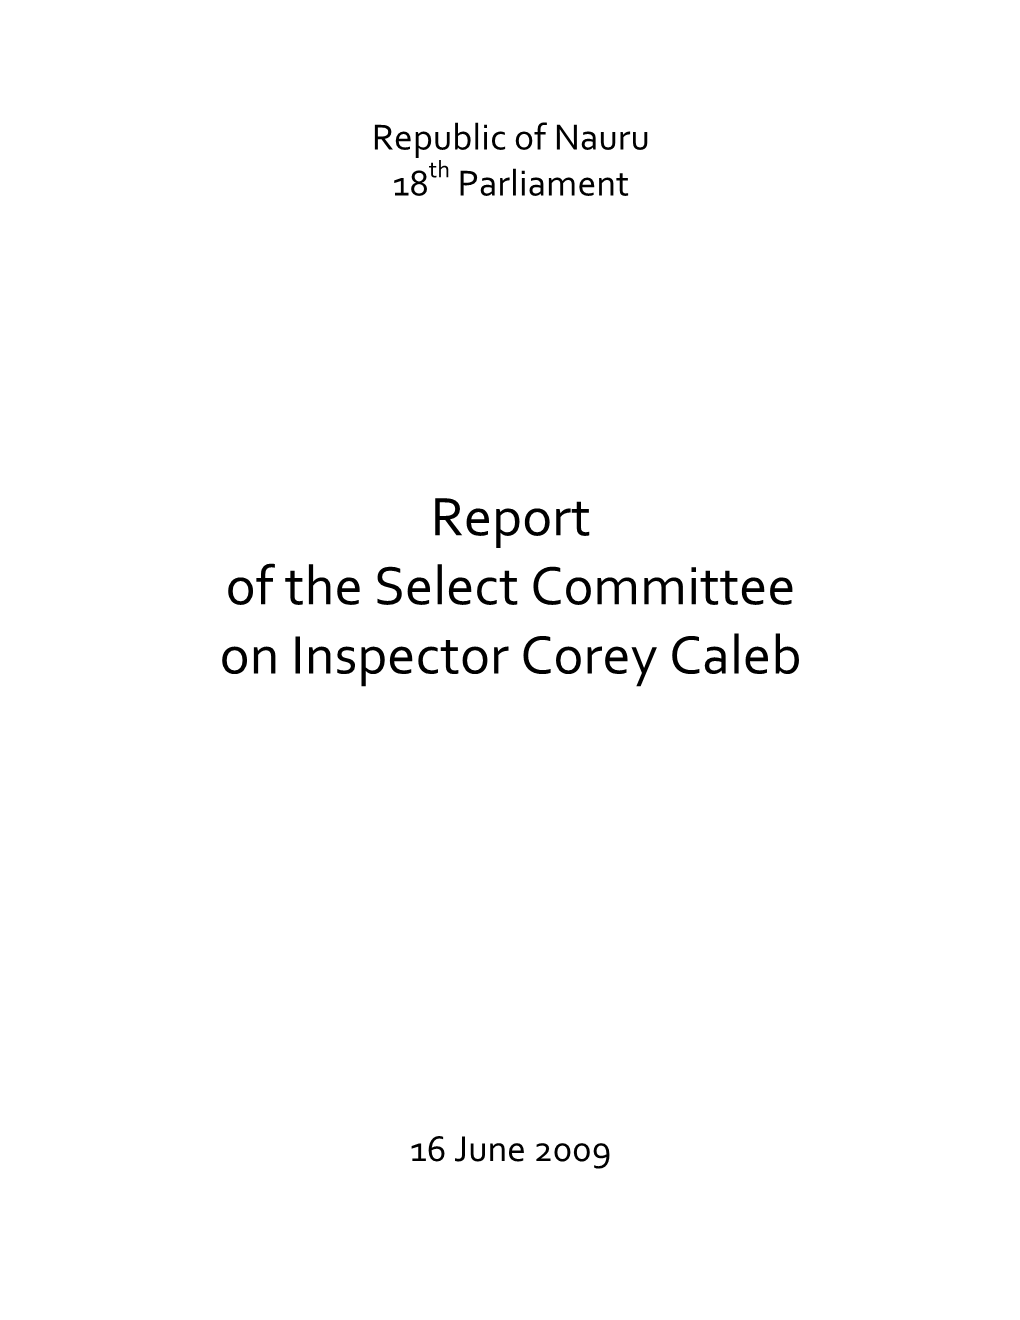 Revised Report Was Unanimously Adopted by All Members of the Committee on 16 June